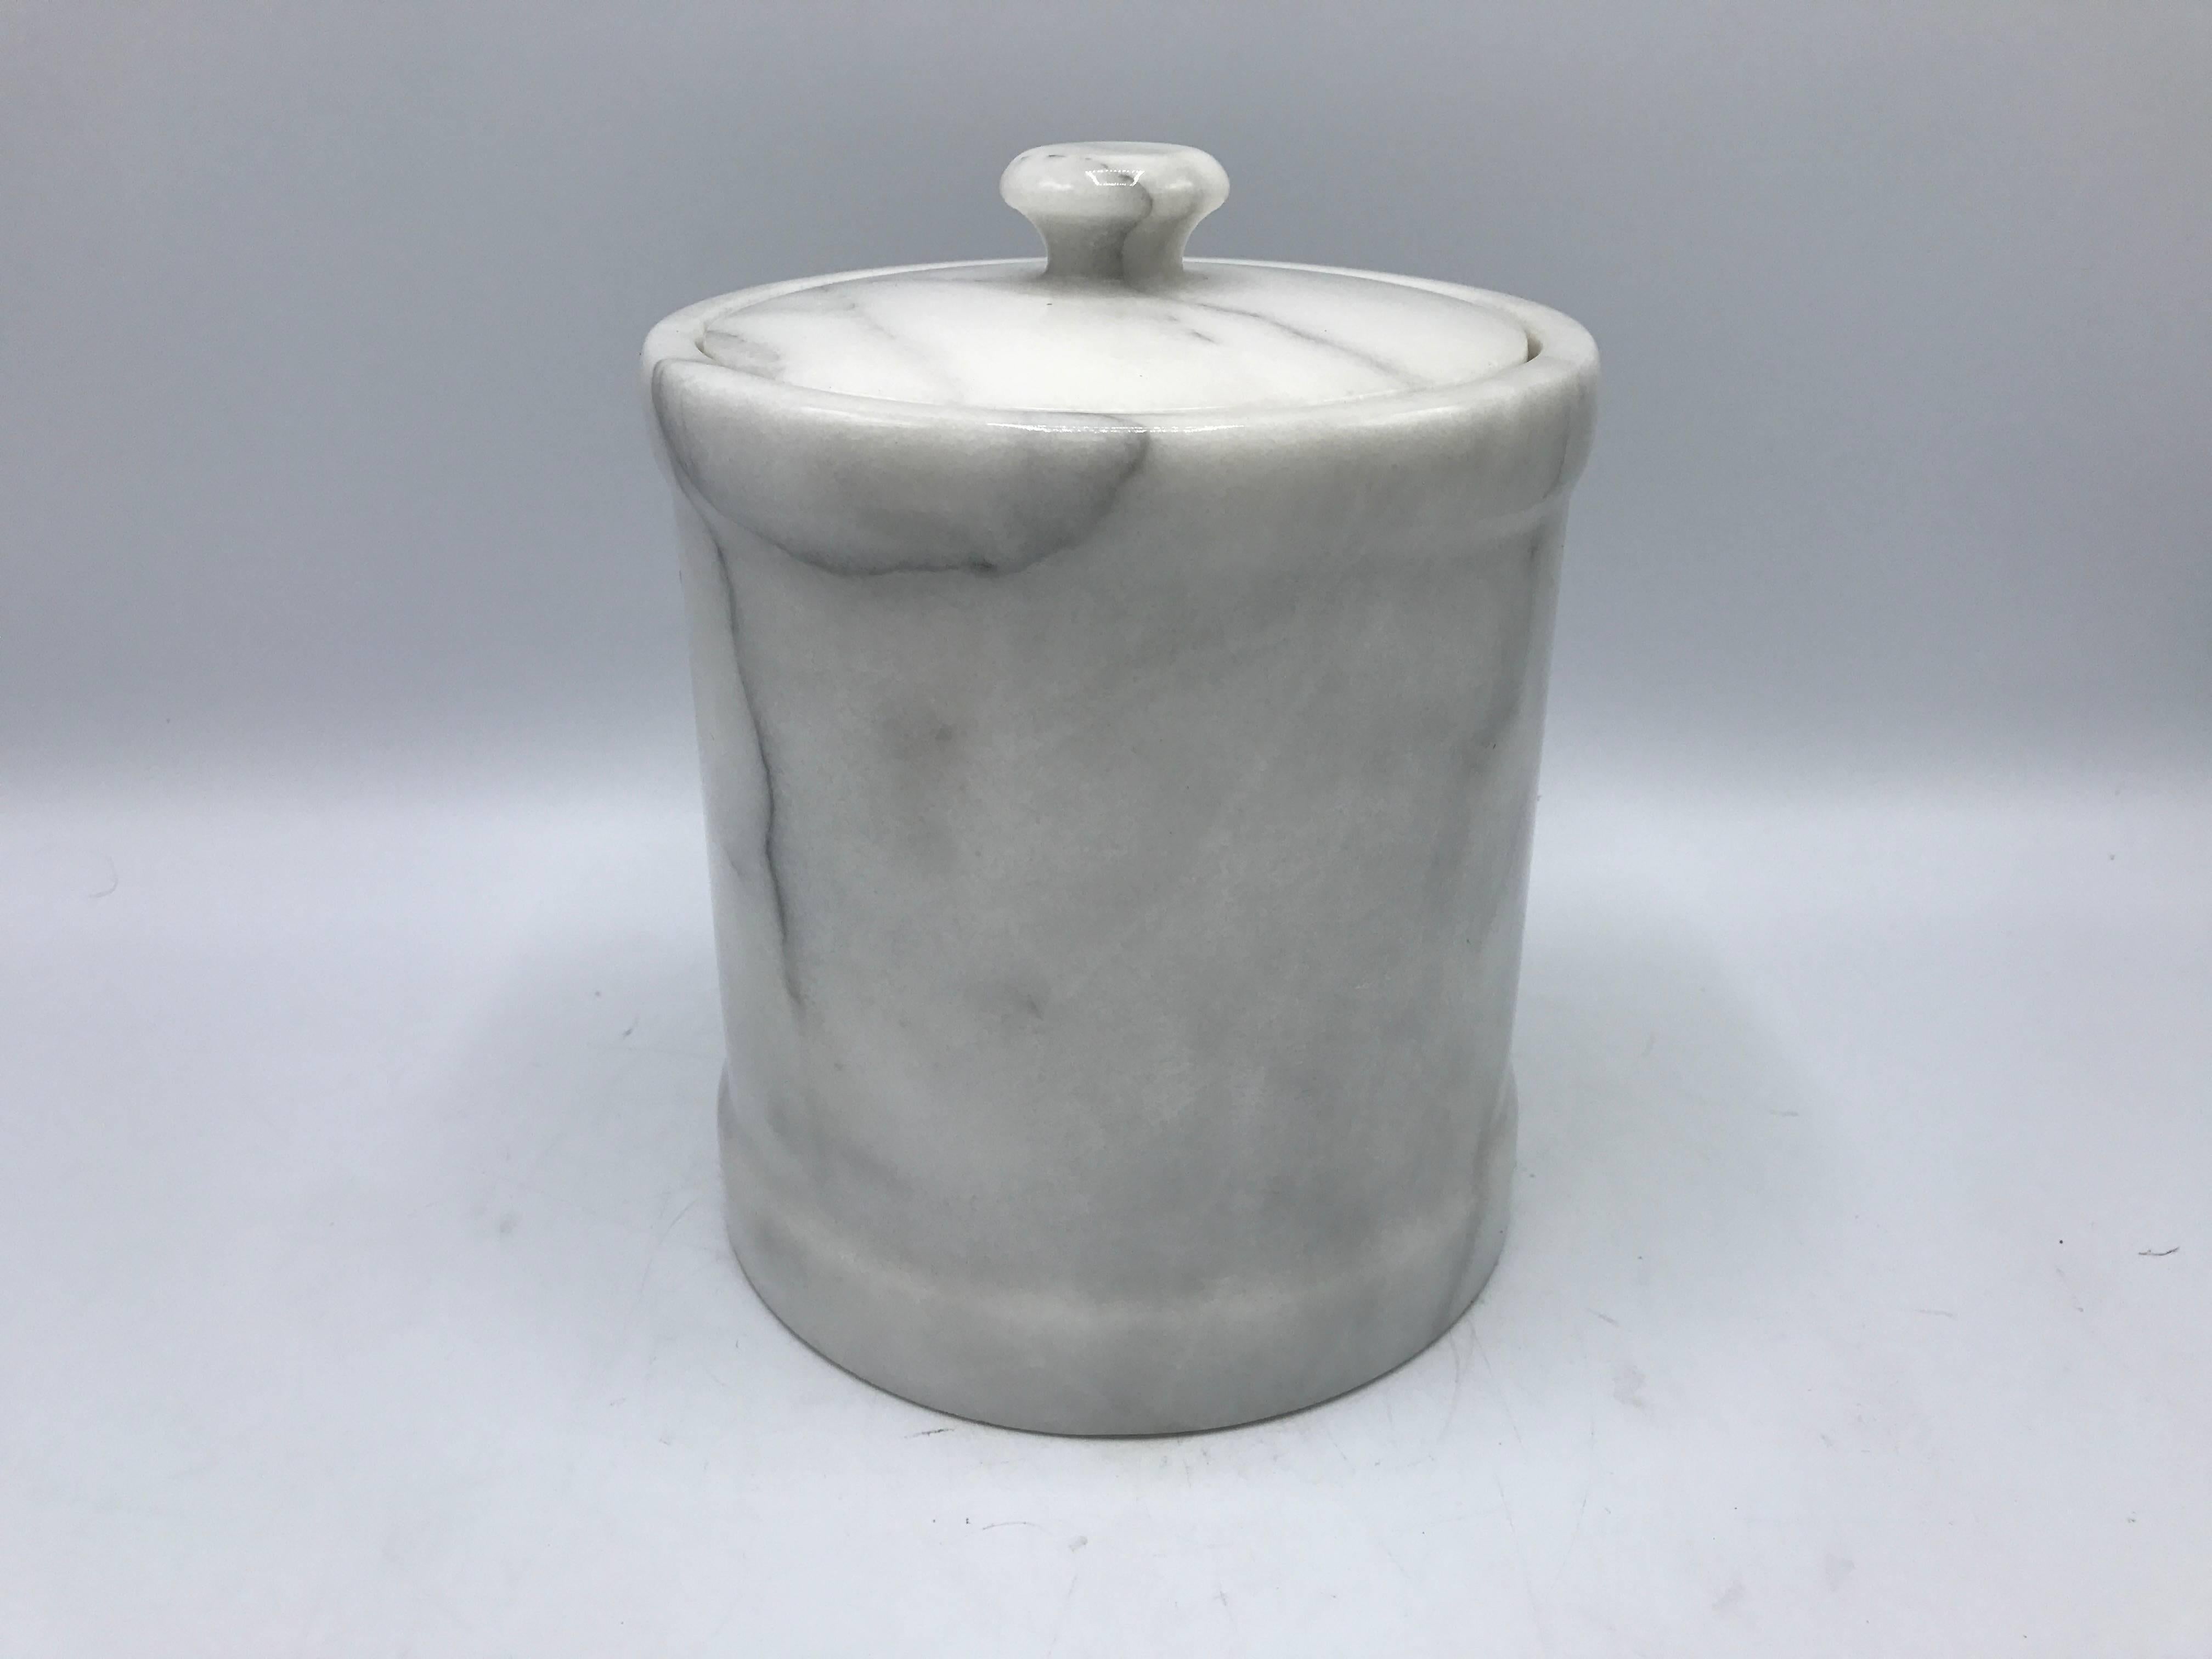 Offered is a fabulous, 1960s Italian marble ice bucket/wine chiller. Includes lid and plastic liner. Heavy.